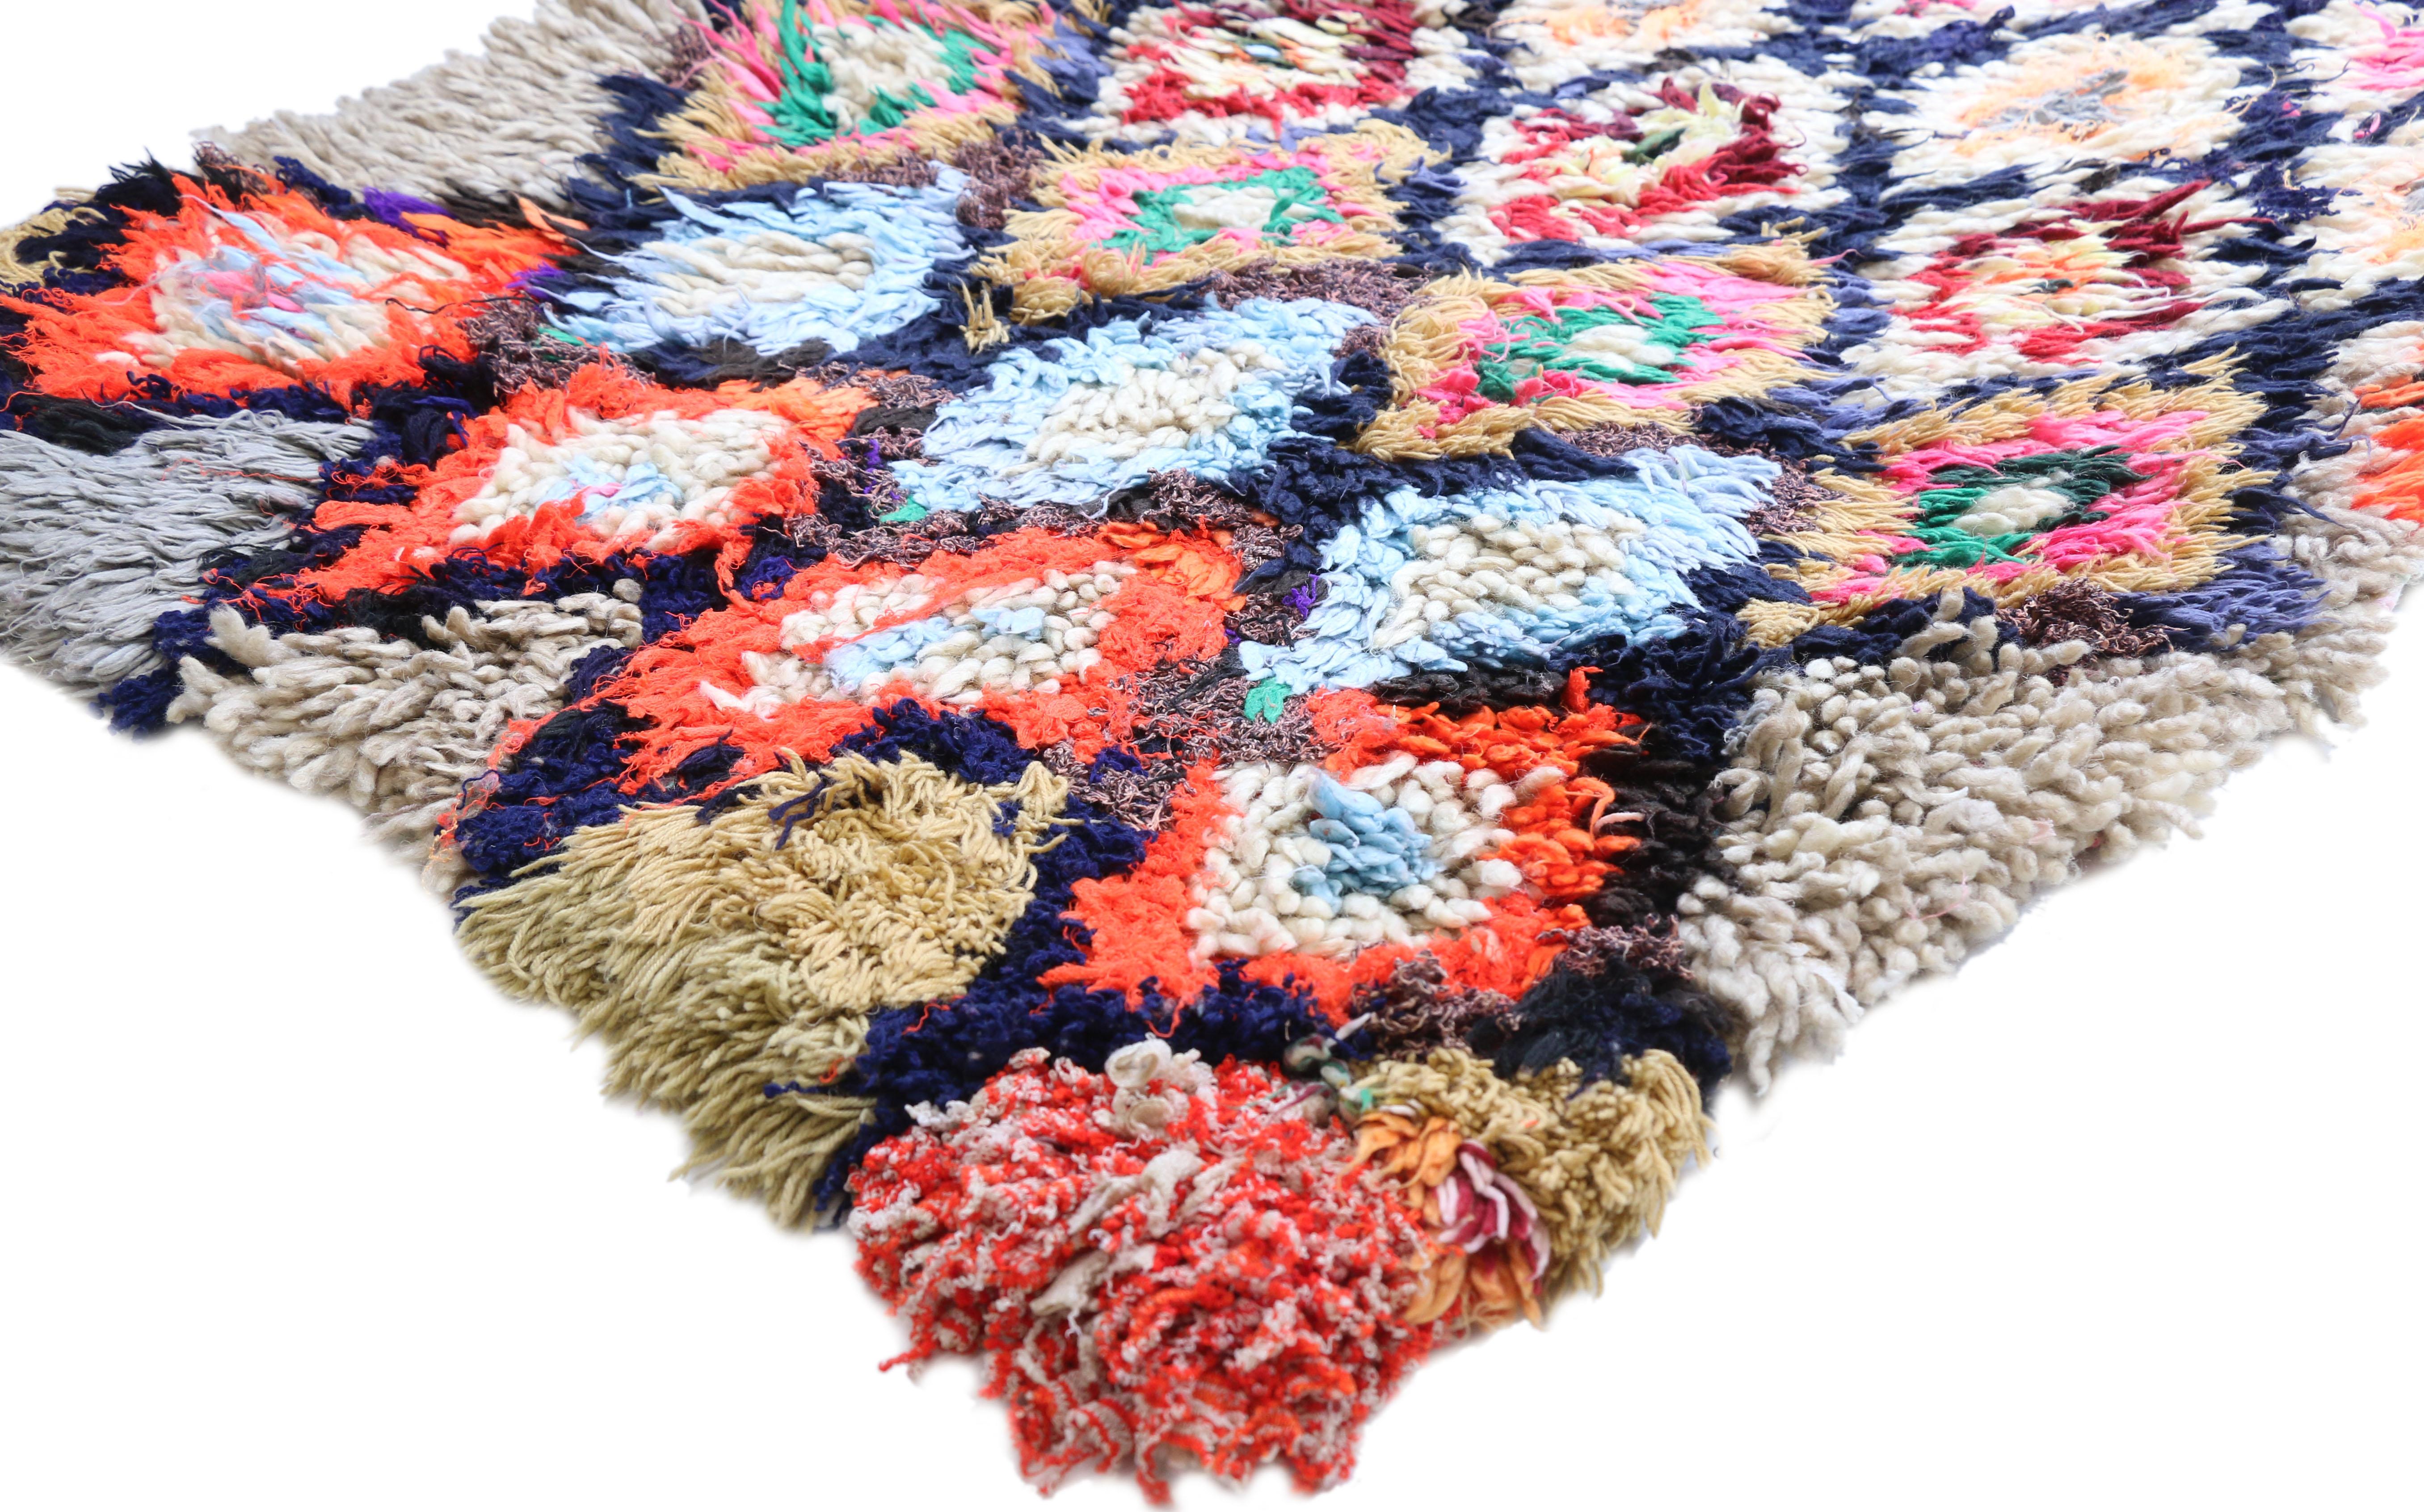 Vintage Moroccan Azilal Rug, Berber Colorful Boucherouite Rug with Tribal Style 2